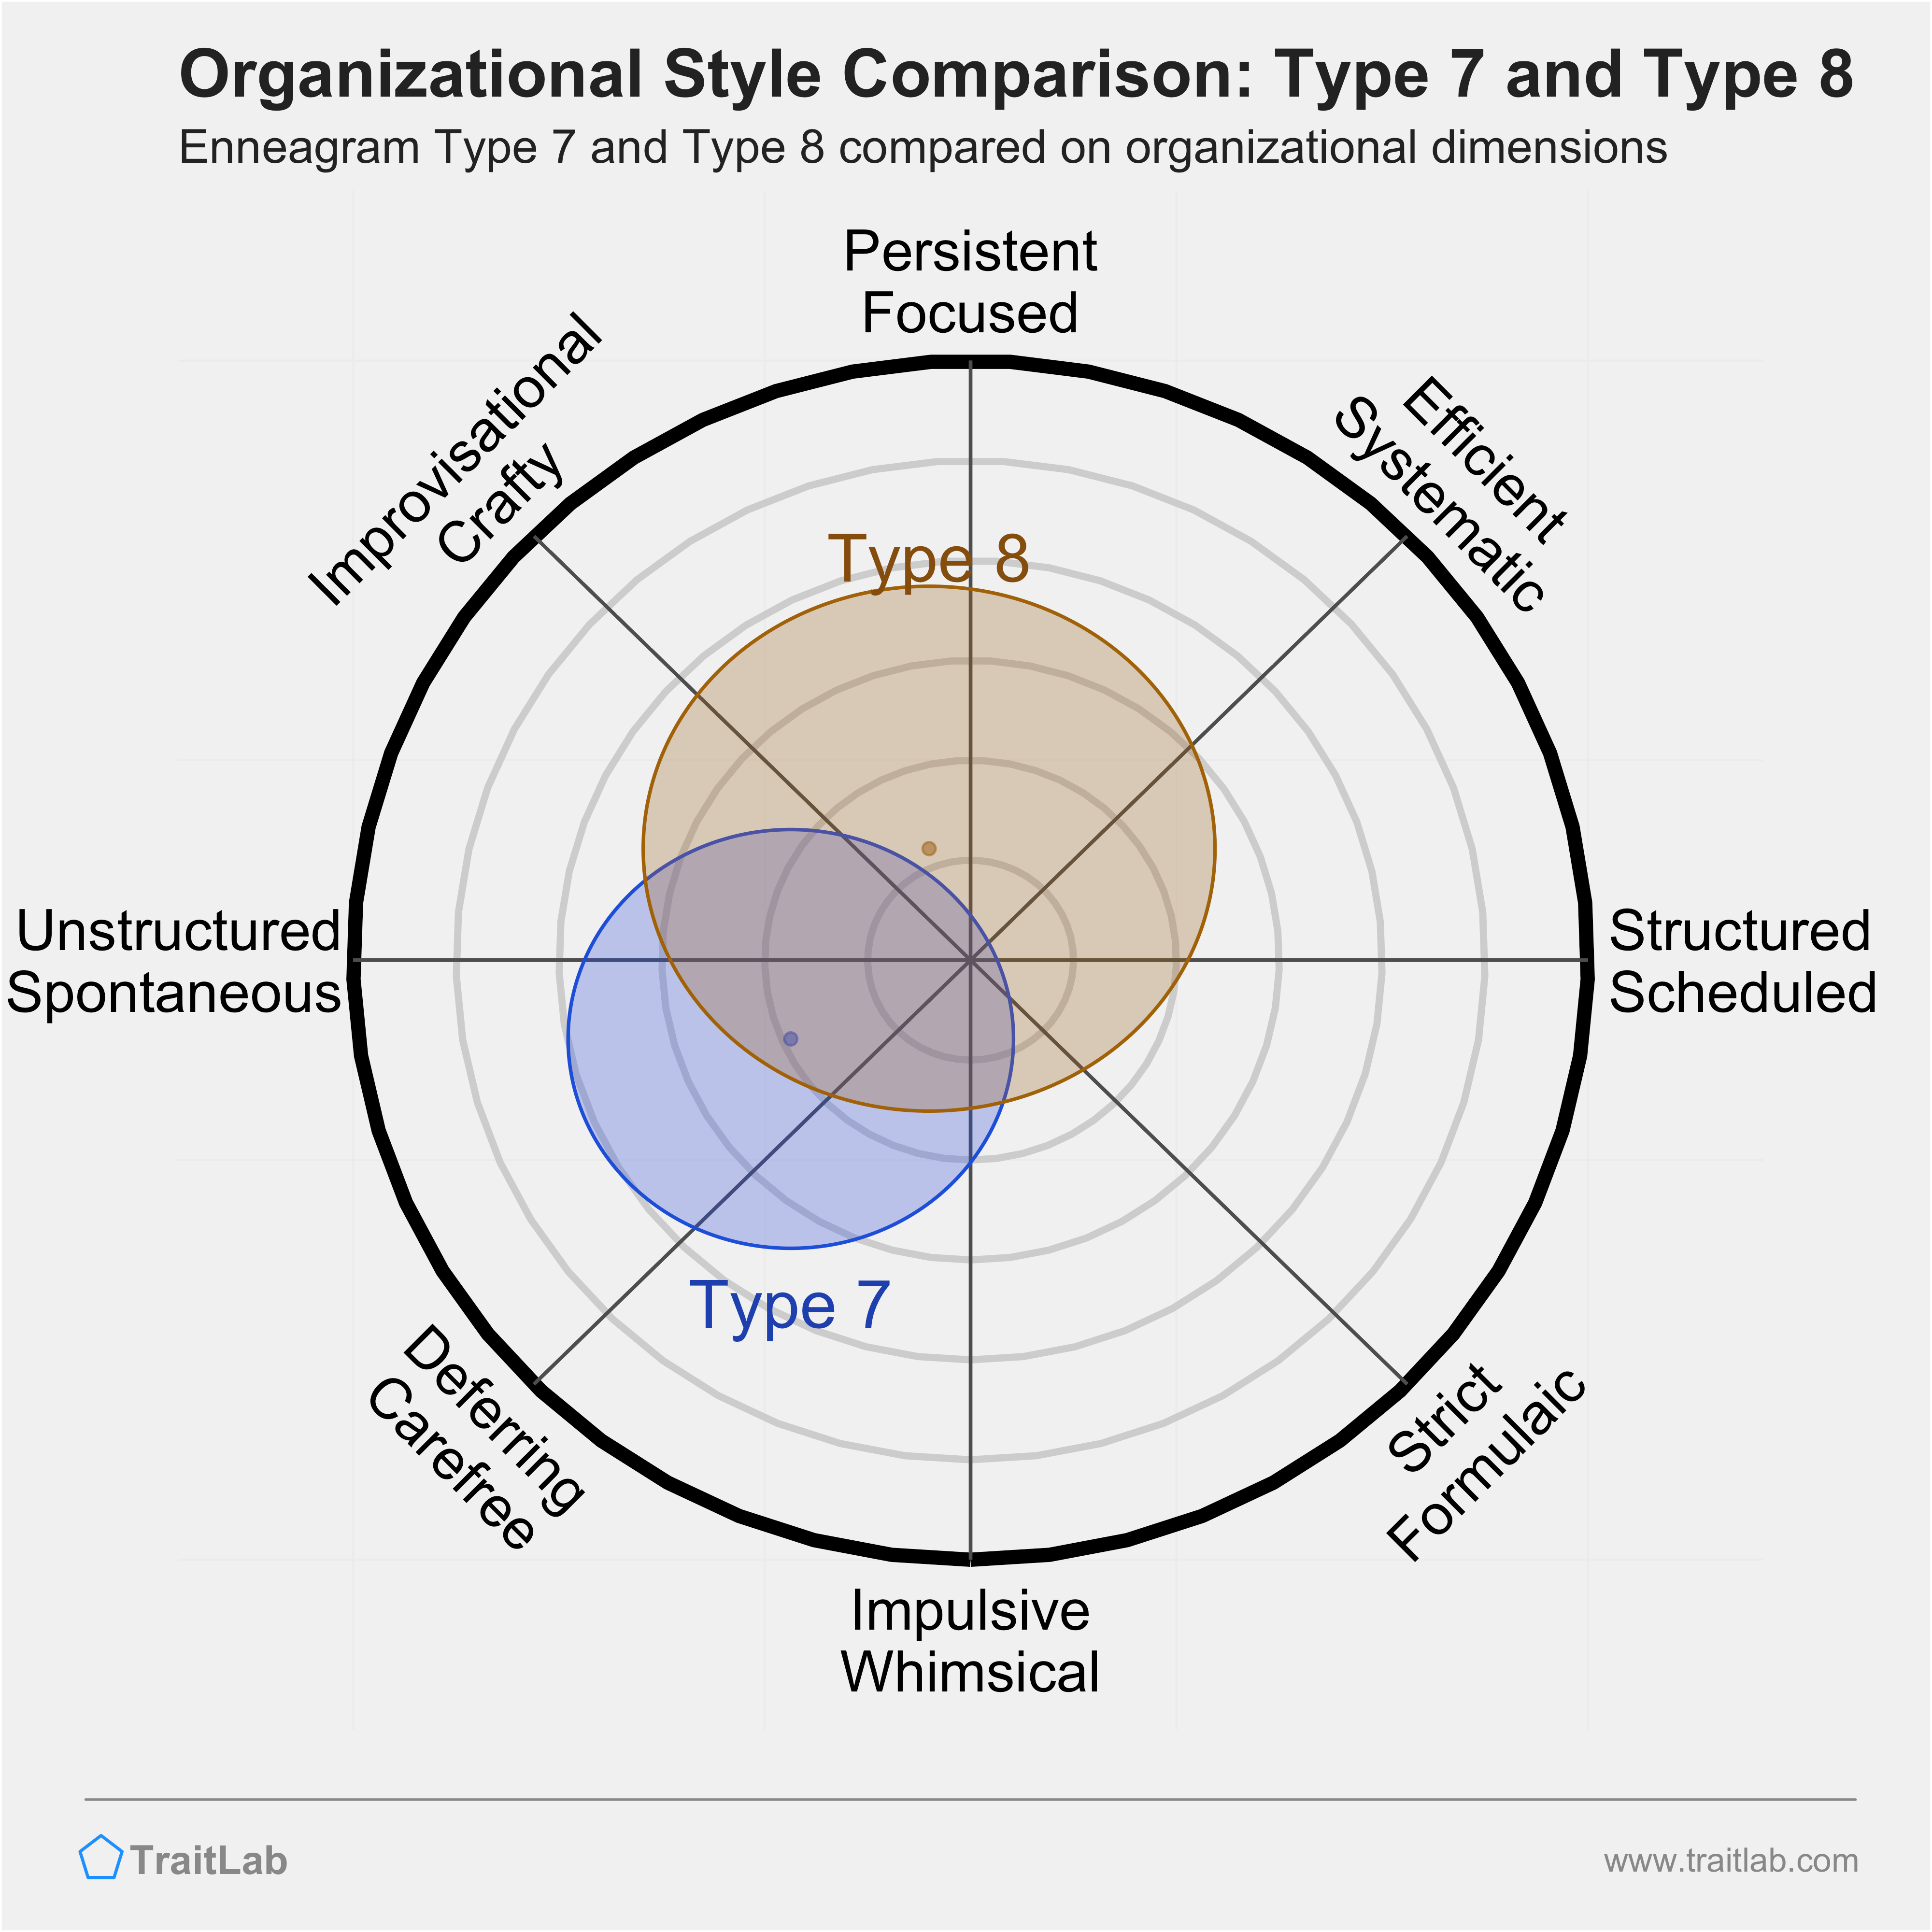 Type 7 and Type 8 comparison across organizational dimensions